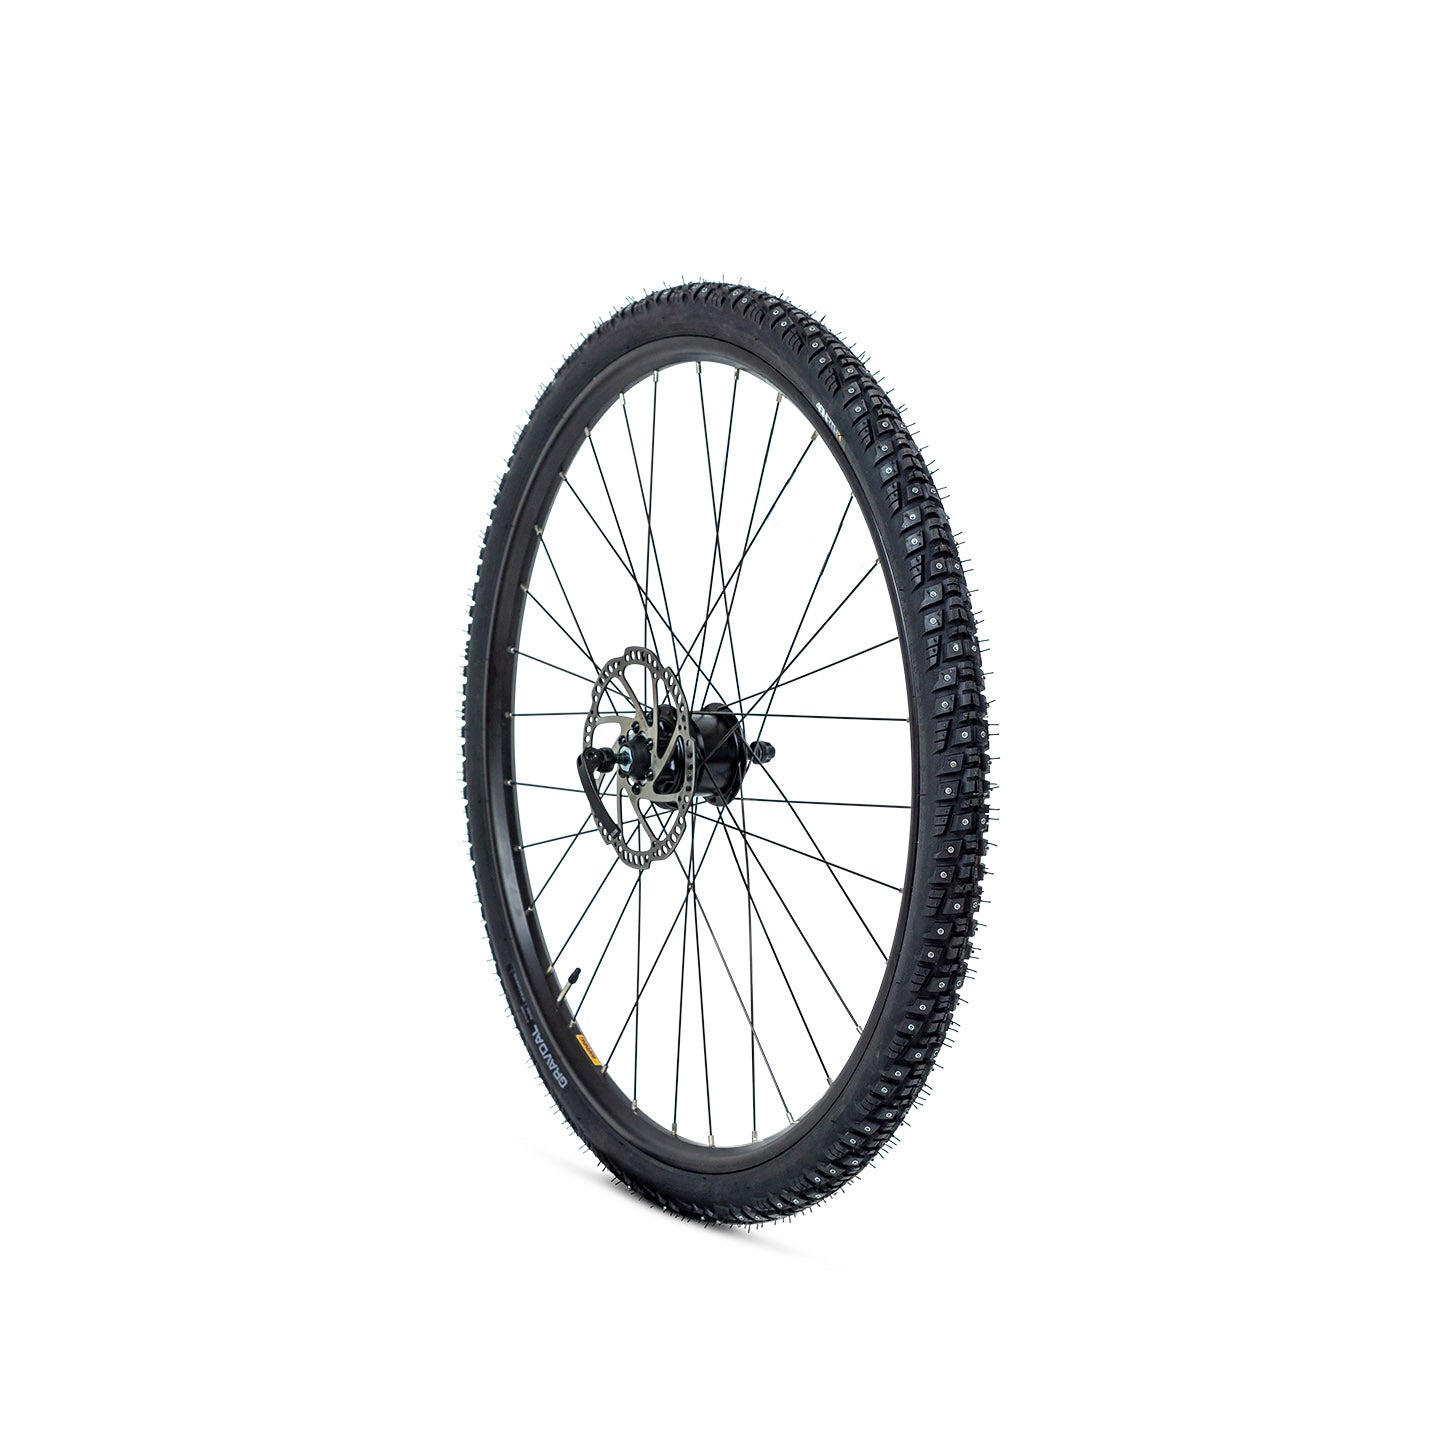 Studded Tire Set for 600 (2 tires)